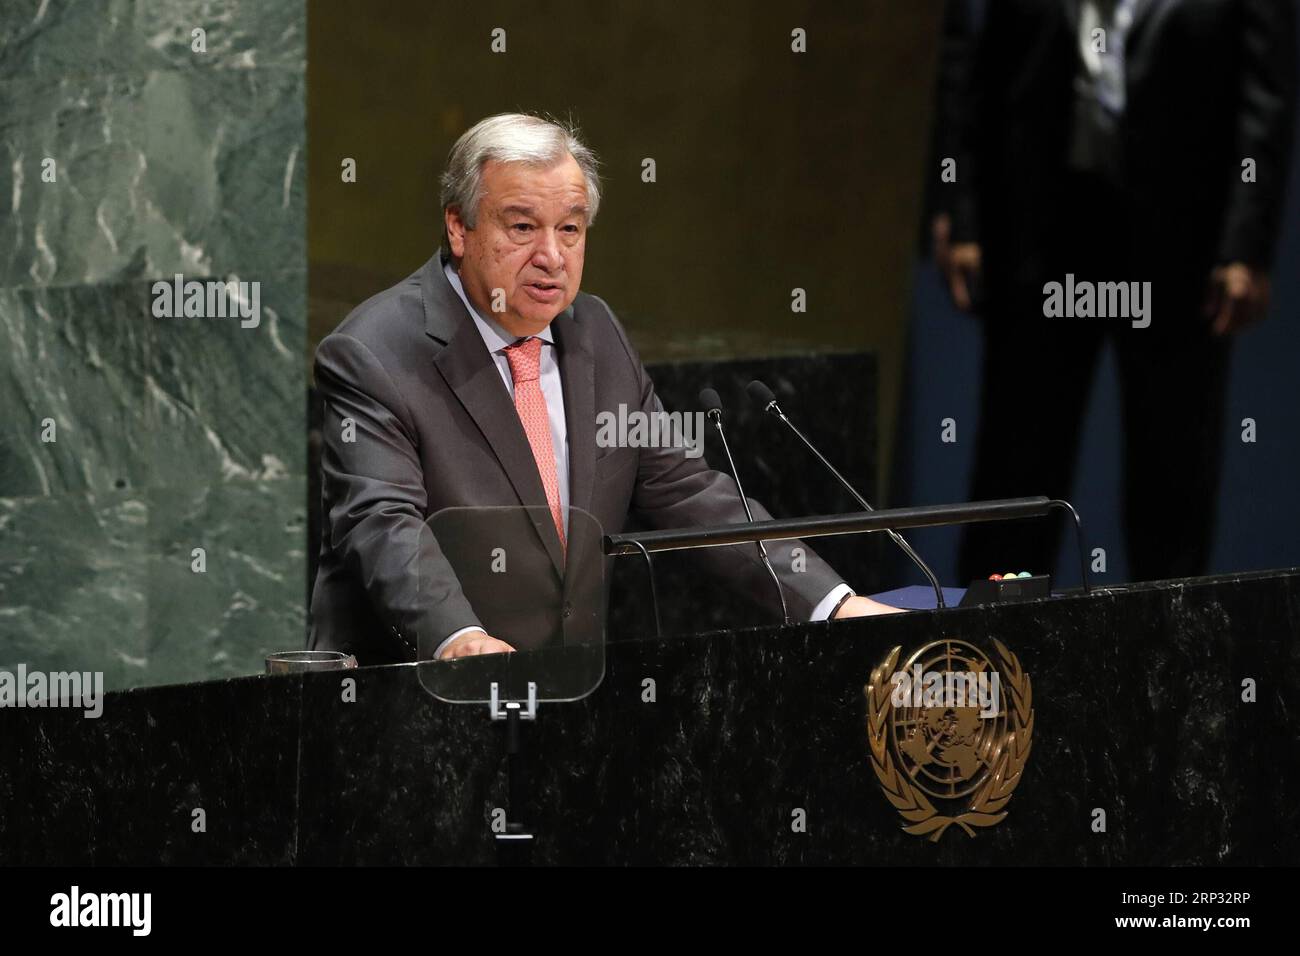 (180917) -- UNITED NATIONS, Sept. 17, 2018 -- United Nations Secretary-General Antonio Guterres addresses the last meeting of the 72nd session of the United Nations General Assembly, at the UN headquarters in New York, Sept. 17, 2018. Outgoing UN General Assembly President Miroslav Lajcak on Monday outlined six major trends he identified during his one-year tenure on his last day in office, highlighting sustaining peace, combat against climate change and UN reform, among other things. ) UN-GENERAL ASSEMBLY-72ND SESSION-LAST MEETING LixMuzi PUBLICATIONxNOTxINxCHN Stock Photo